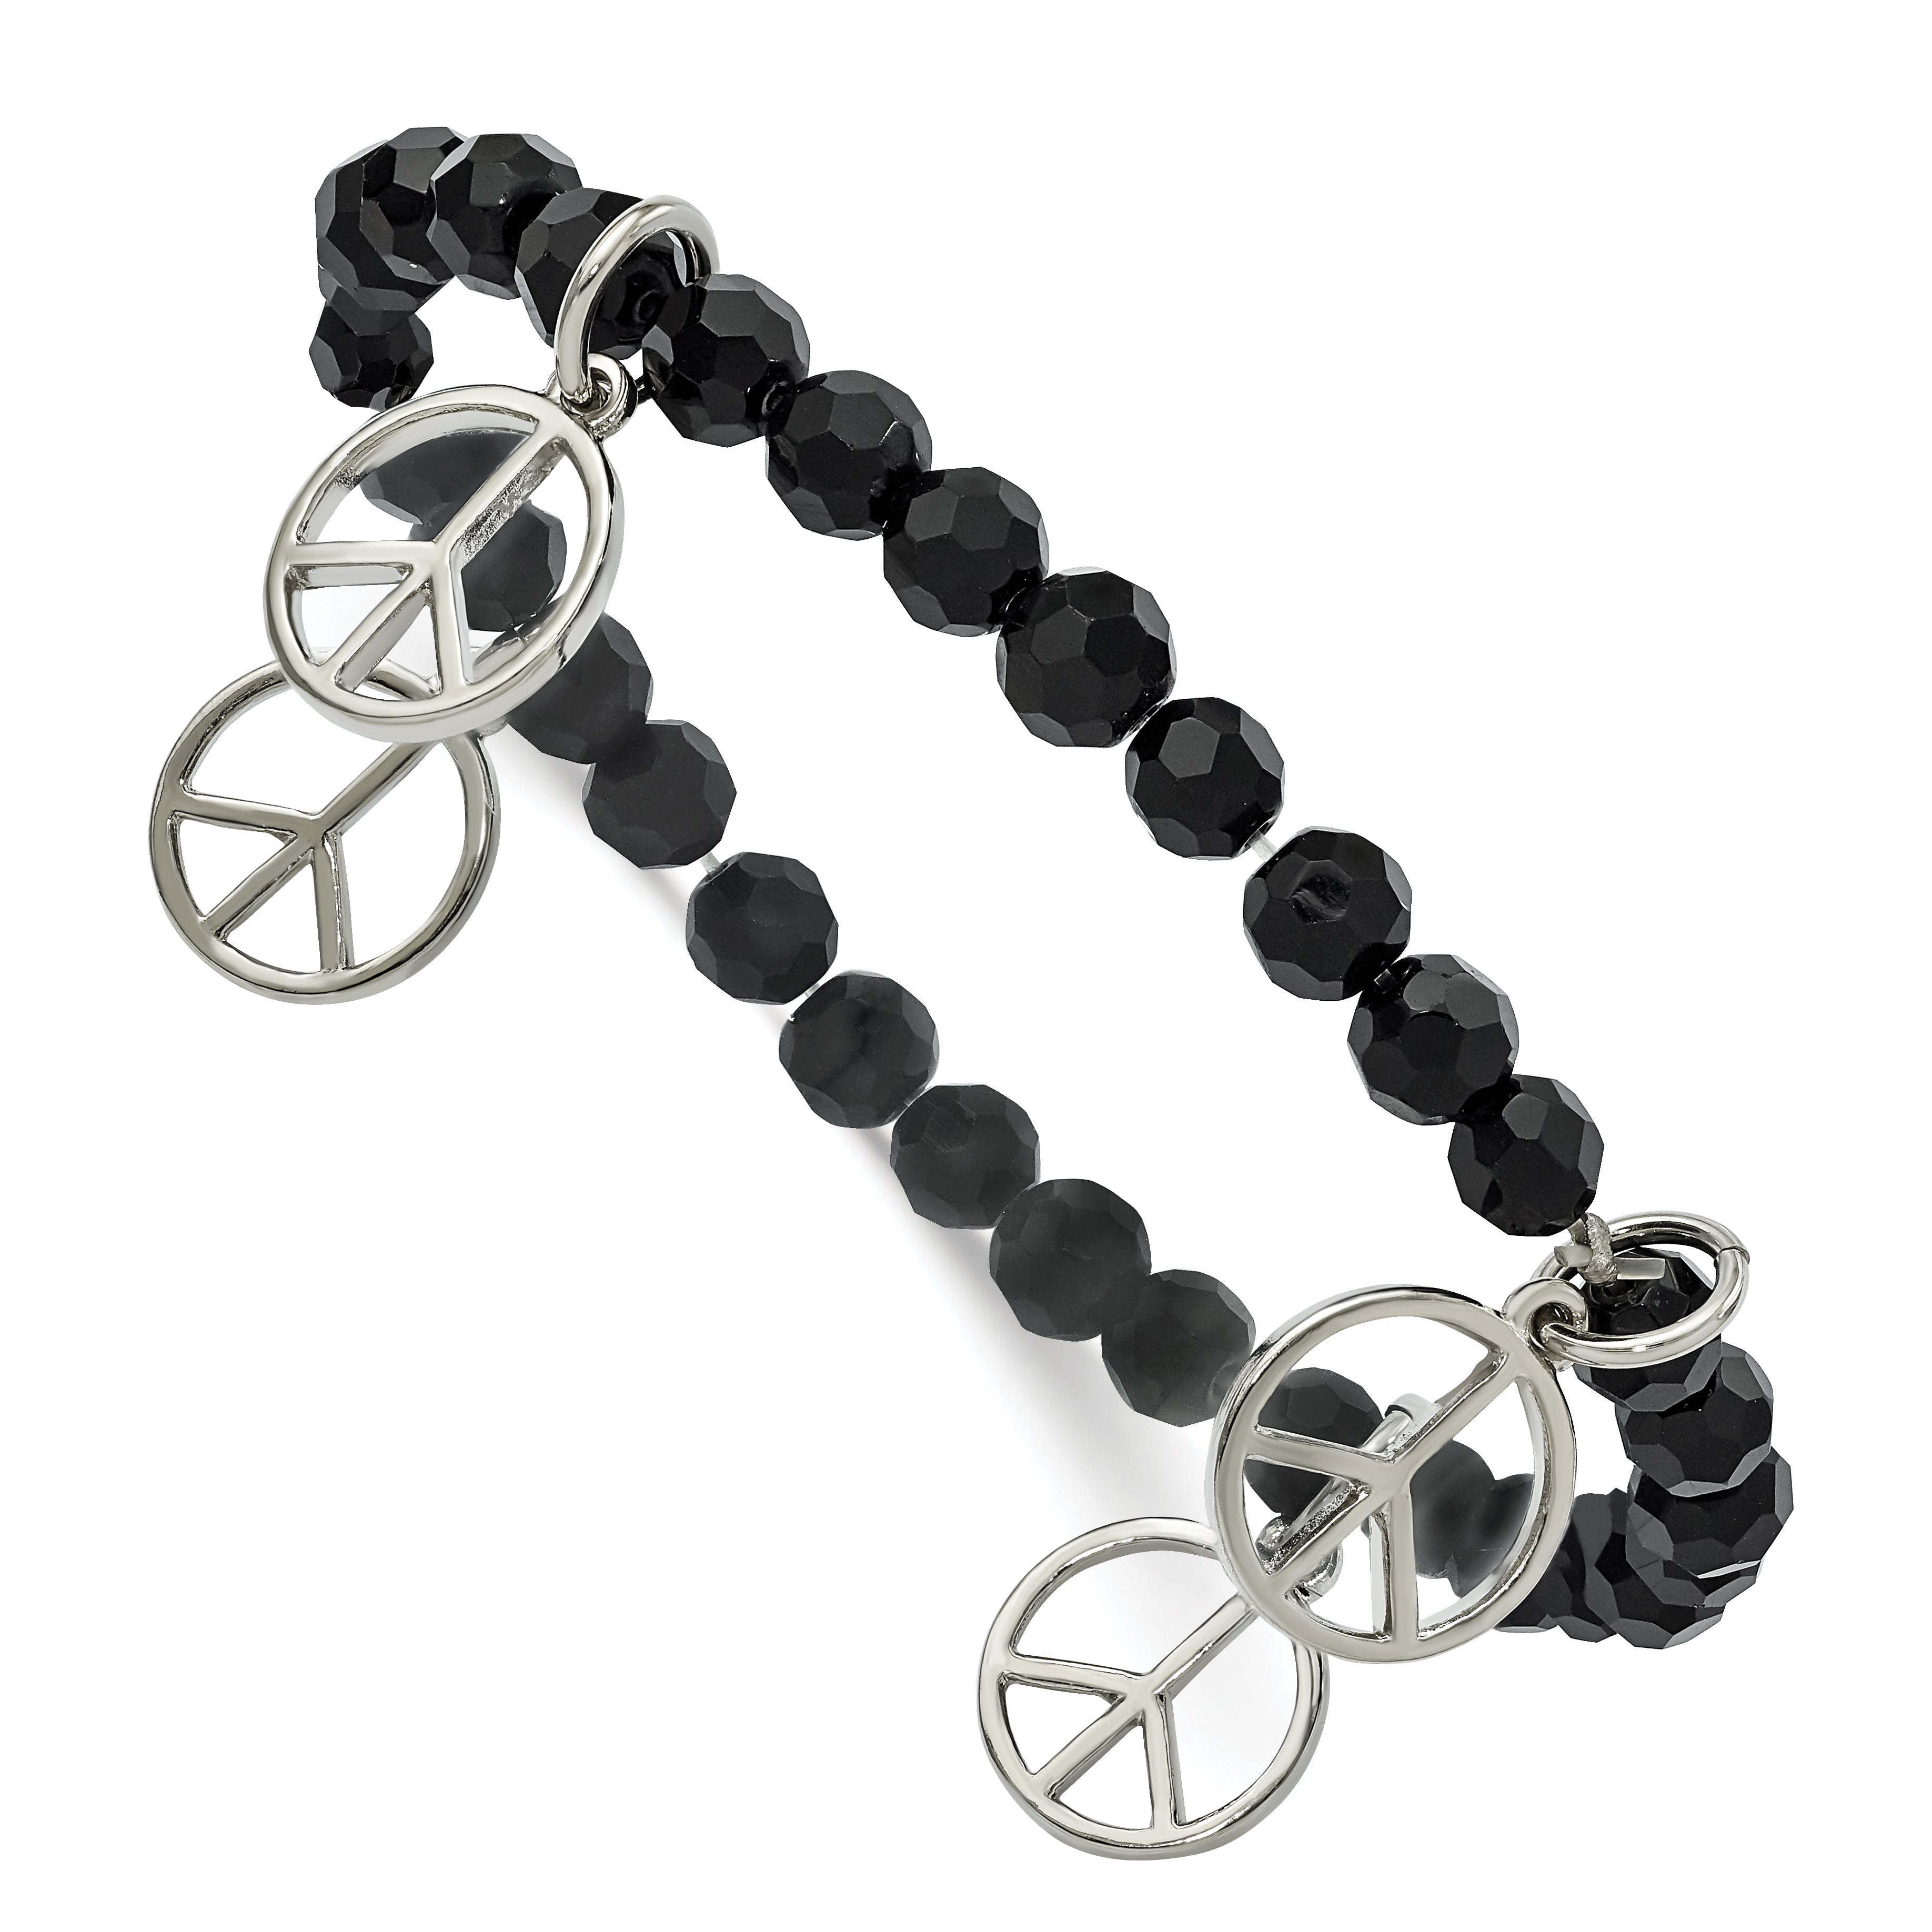 1928 Jewelry Silver-tone Peace Charms on Jet Black Crystal Faceted Beaded Stretch Bracelet